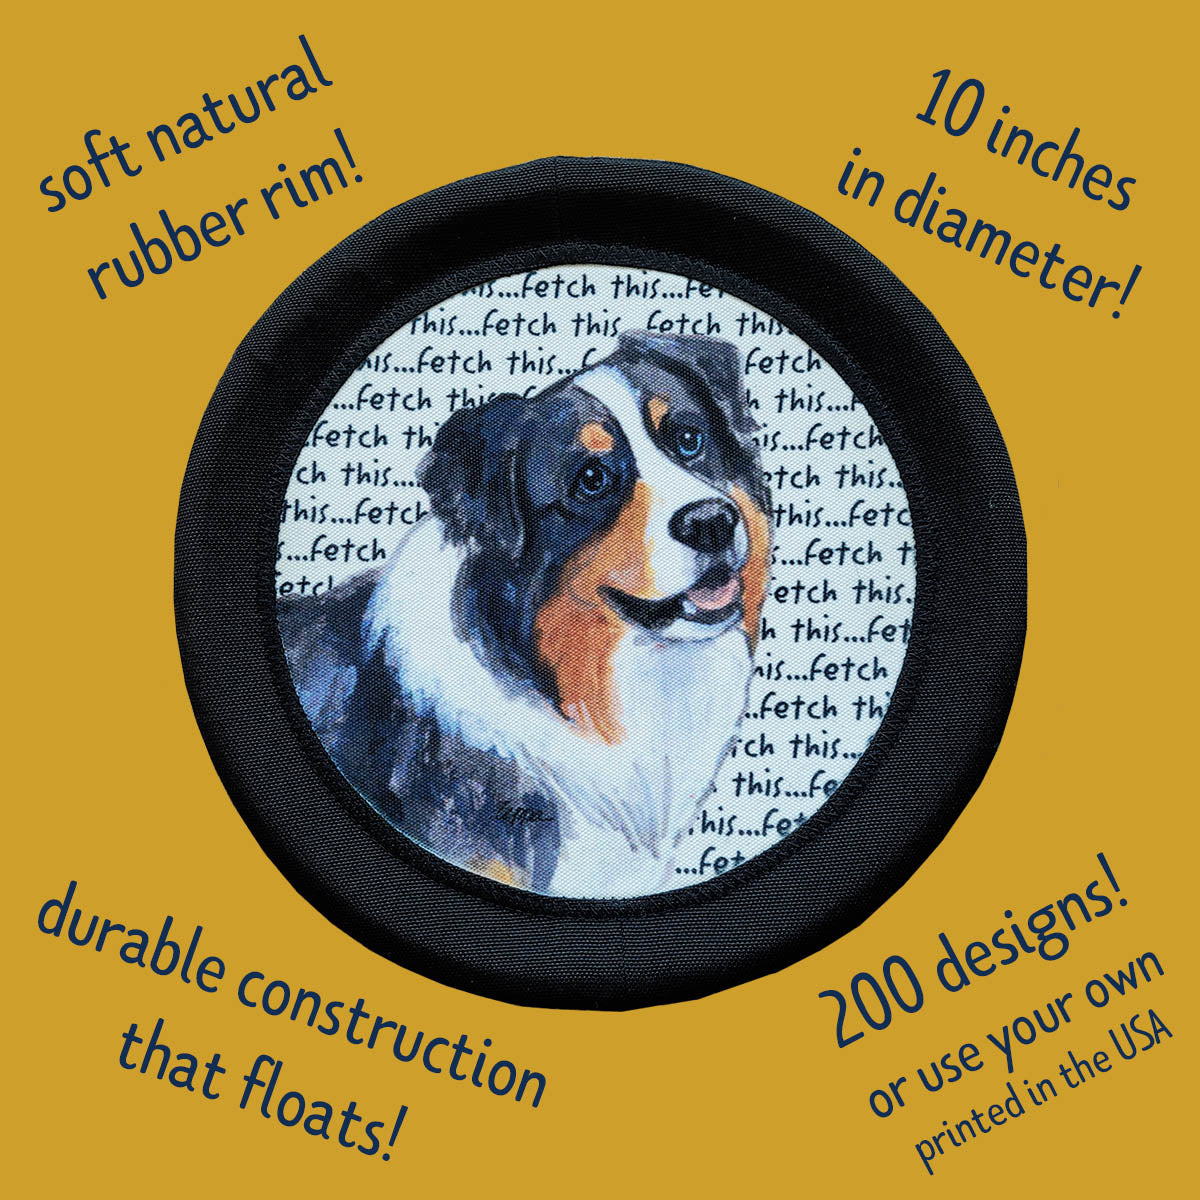 Features of the FotoFrisby Flying Disk Dog Toy - Soft rubber rim, durable construction and it floats!